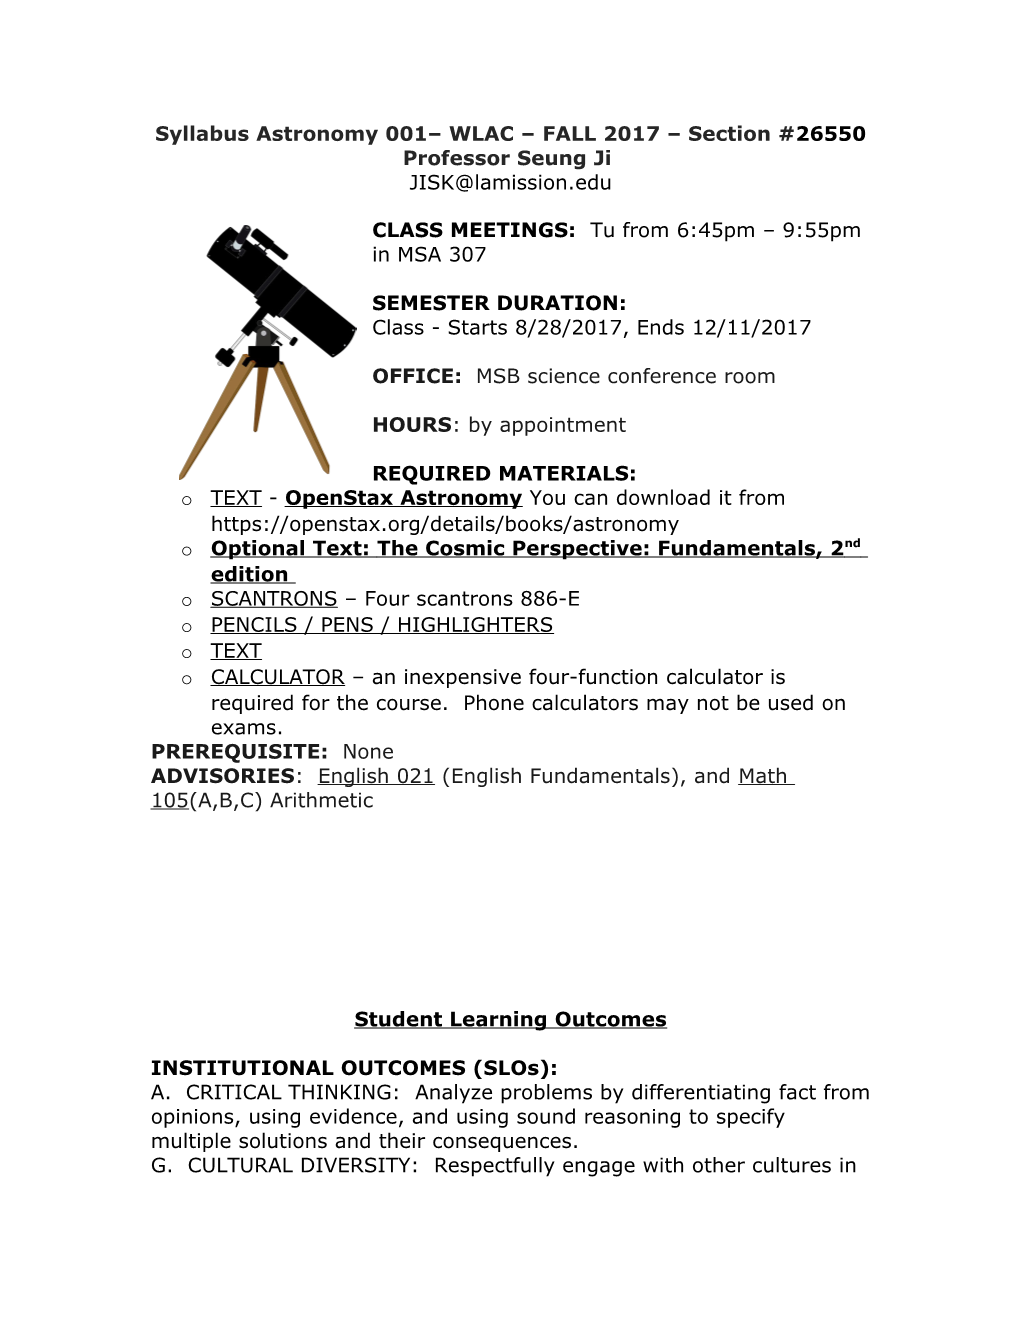 Syllabus Astronomy 001 WLAC FALL 2017 Section #26550